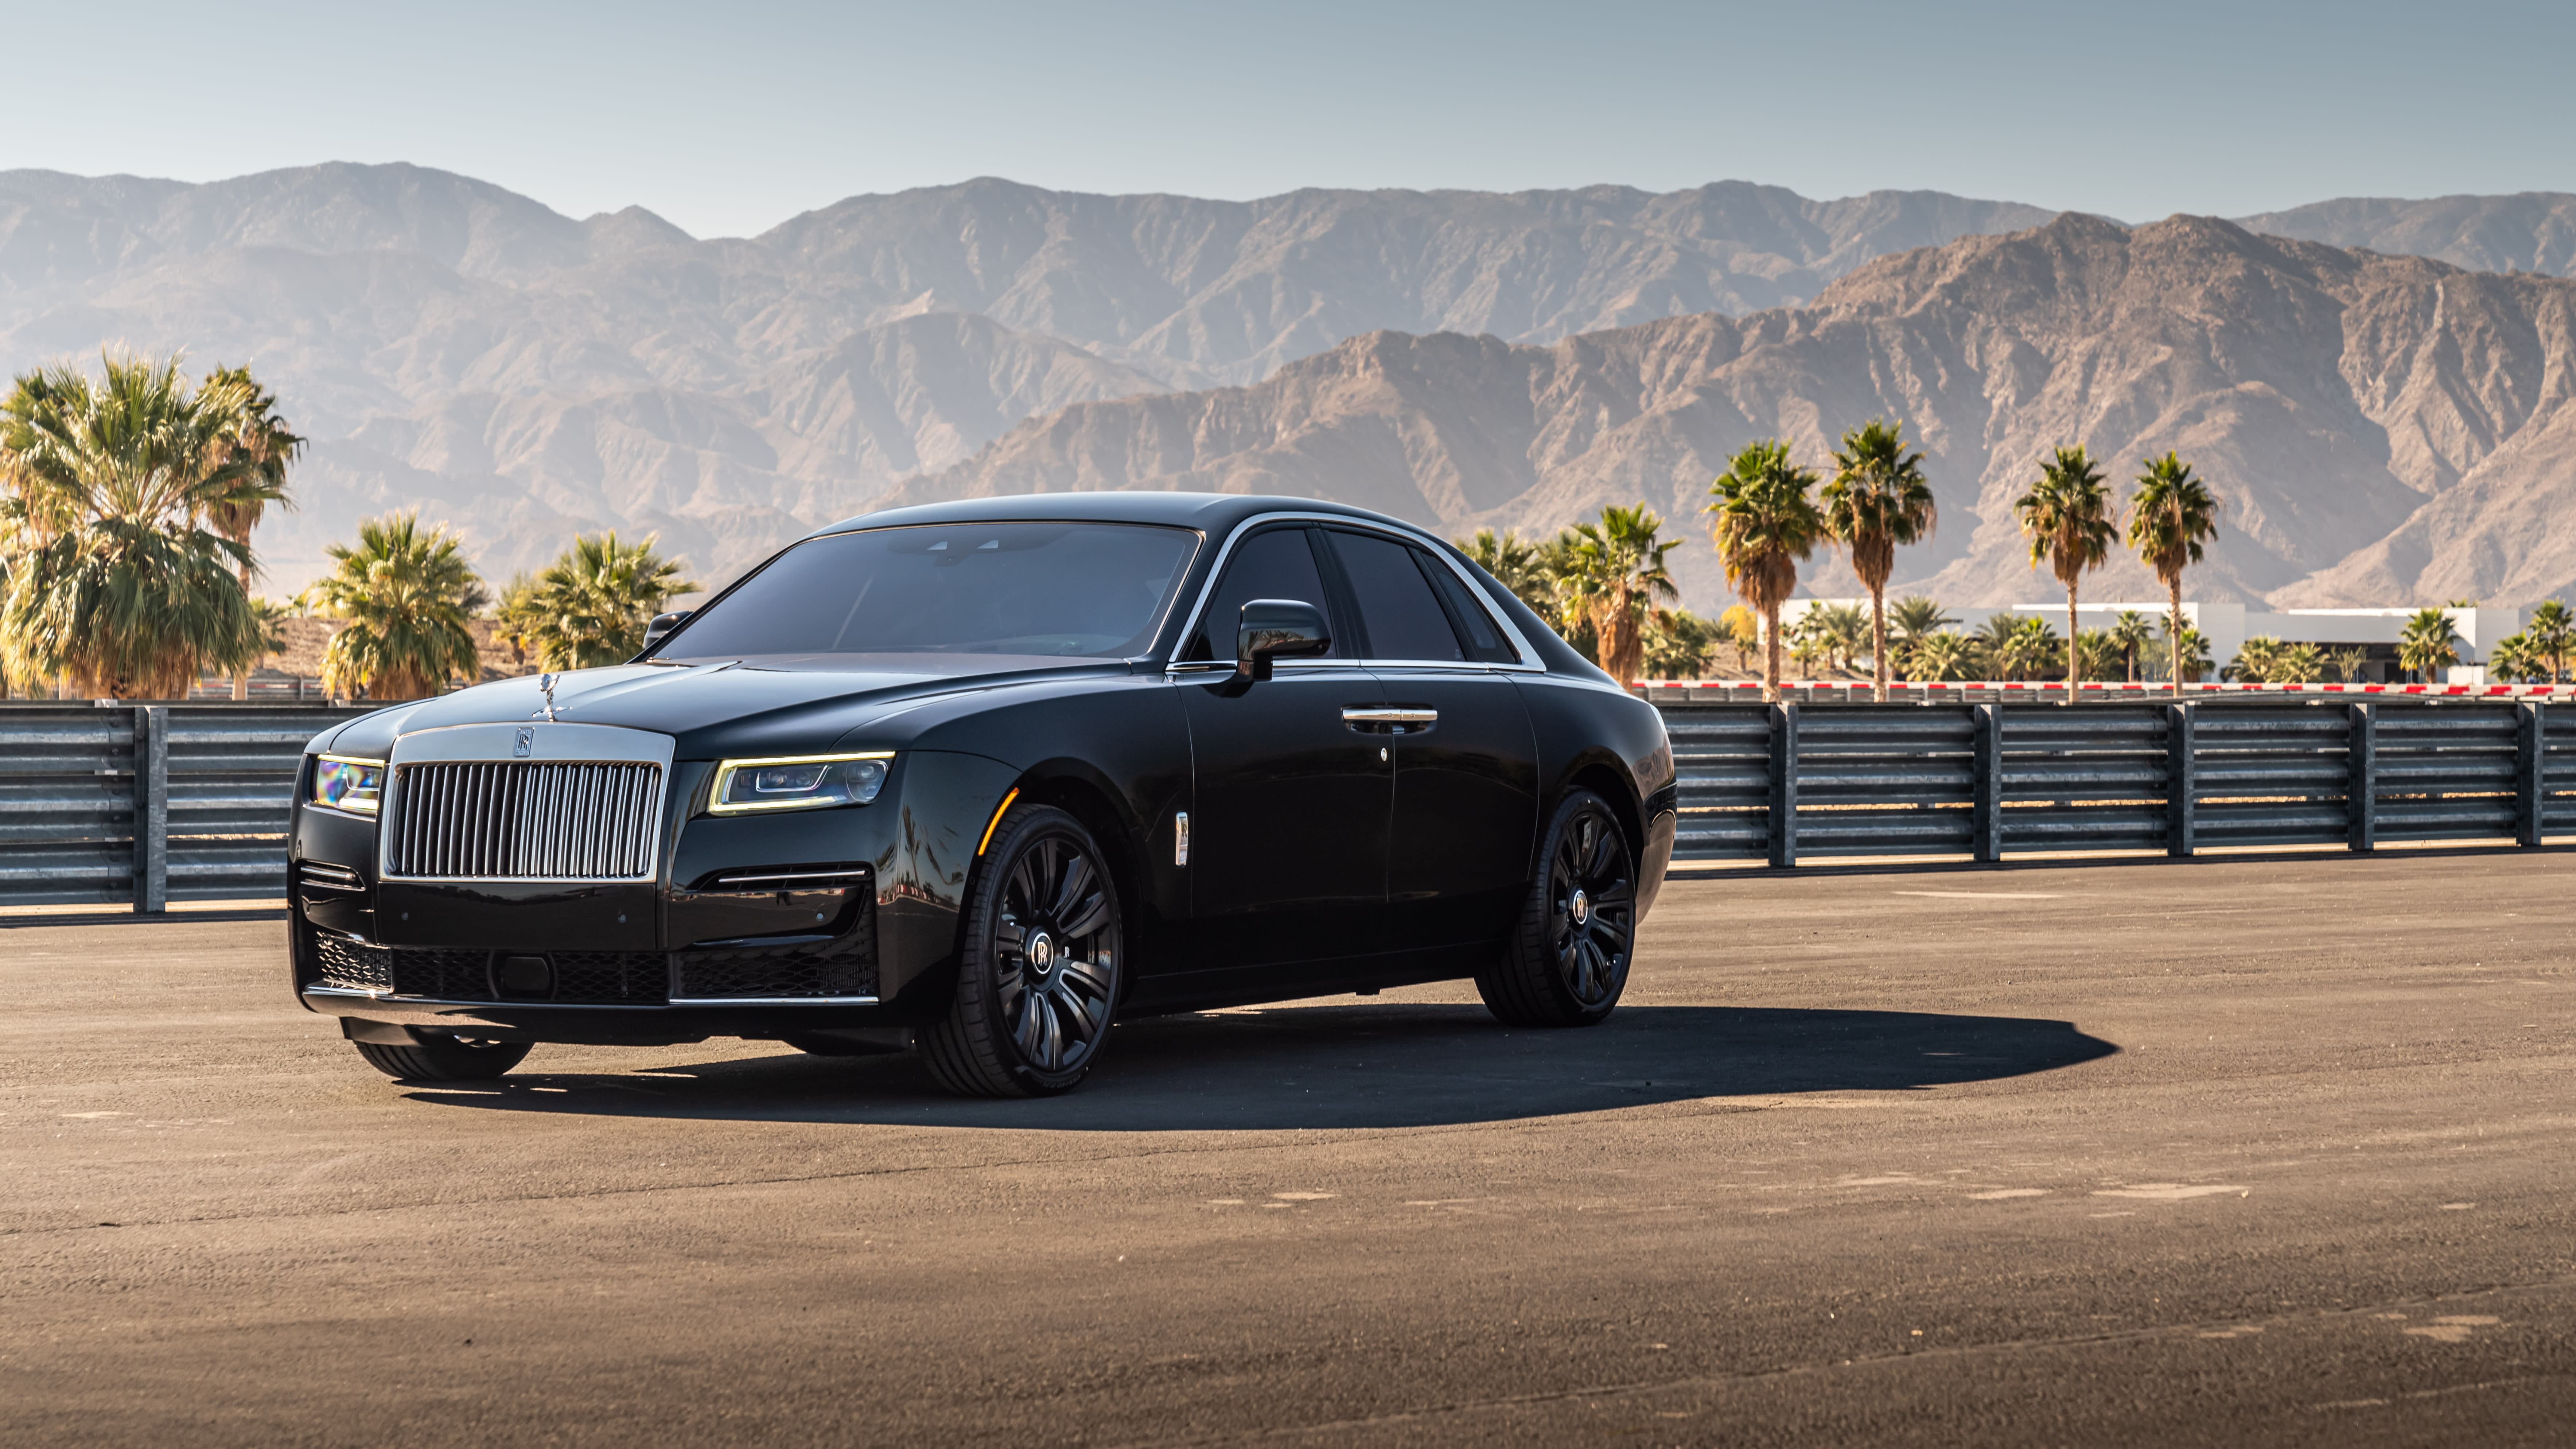 Up close with the post-opulent new Rolls-Royce Ghost